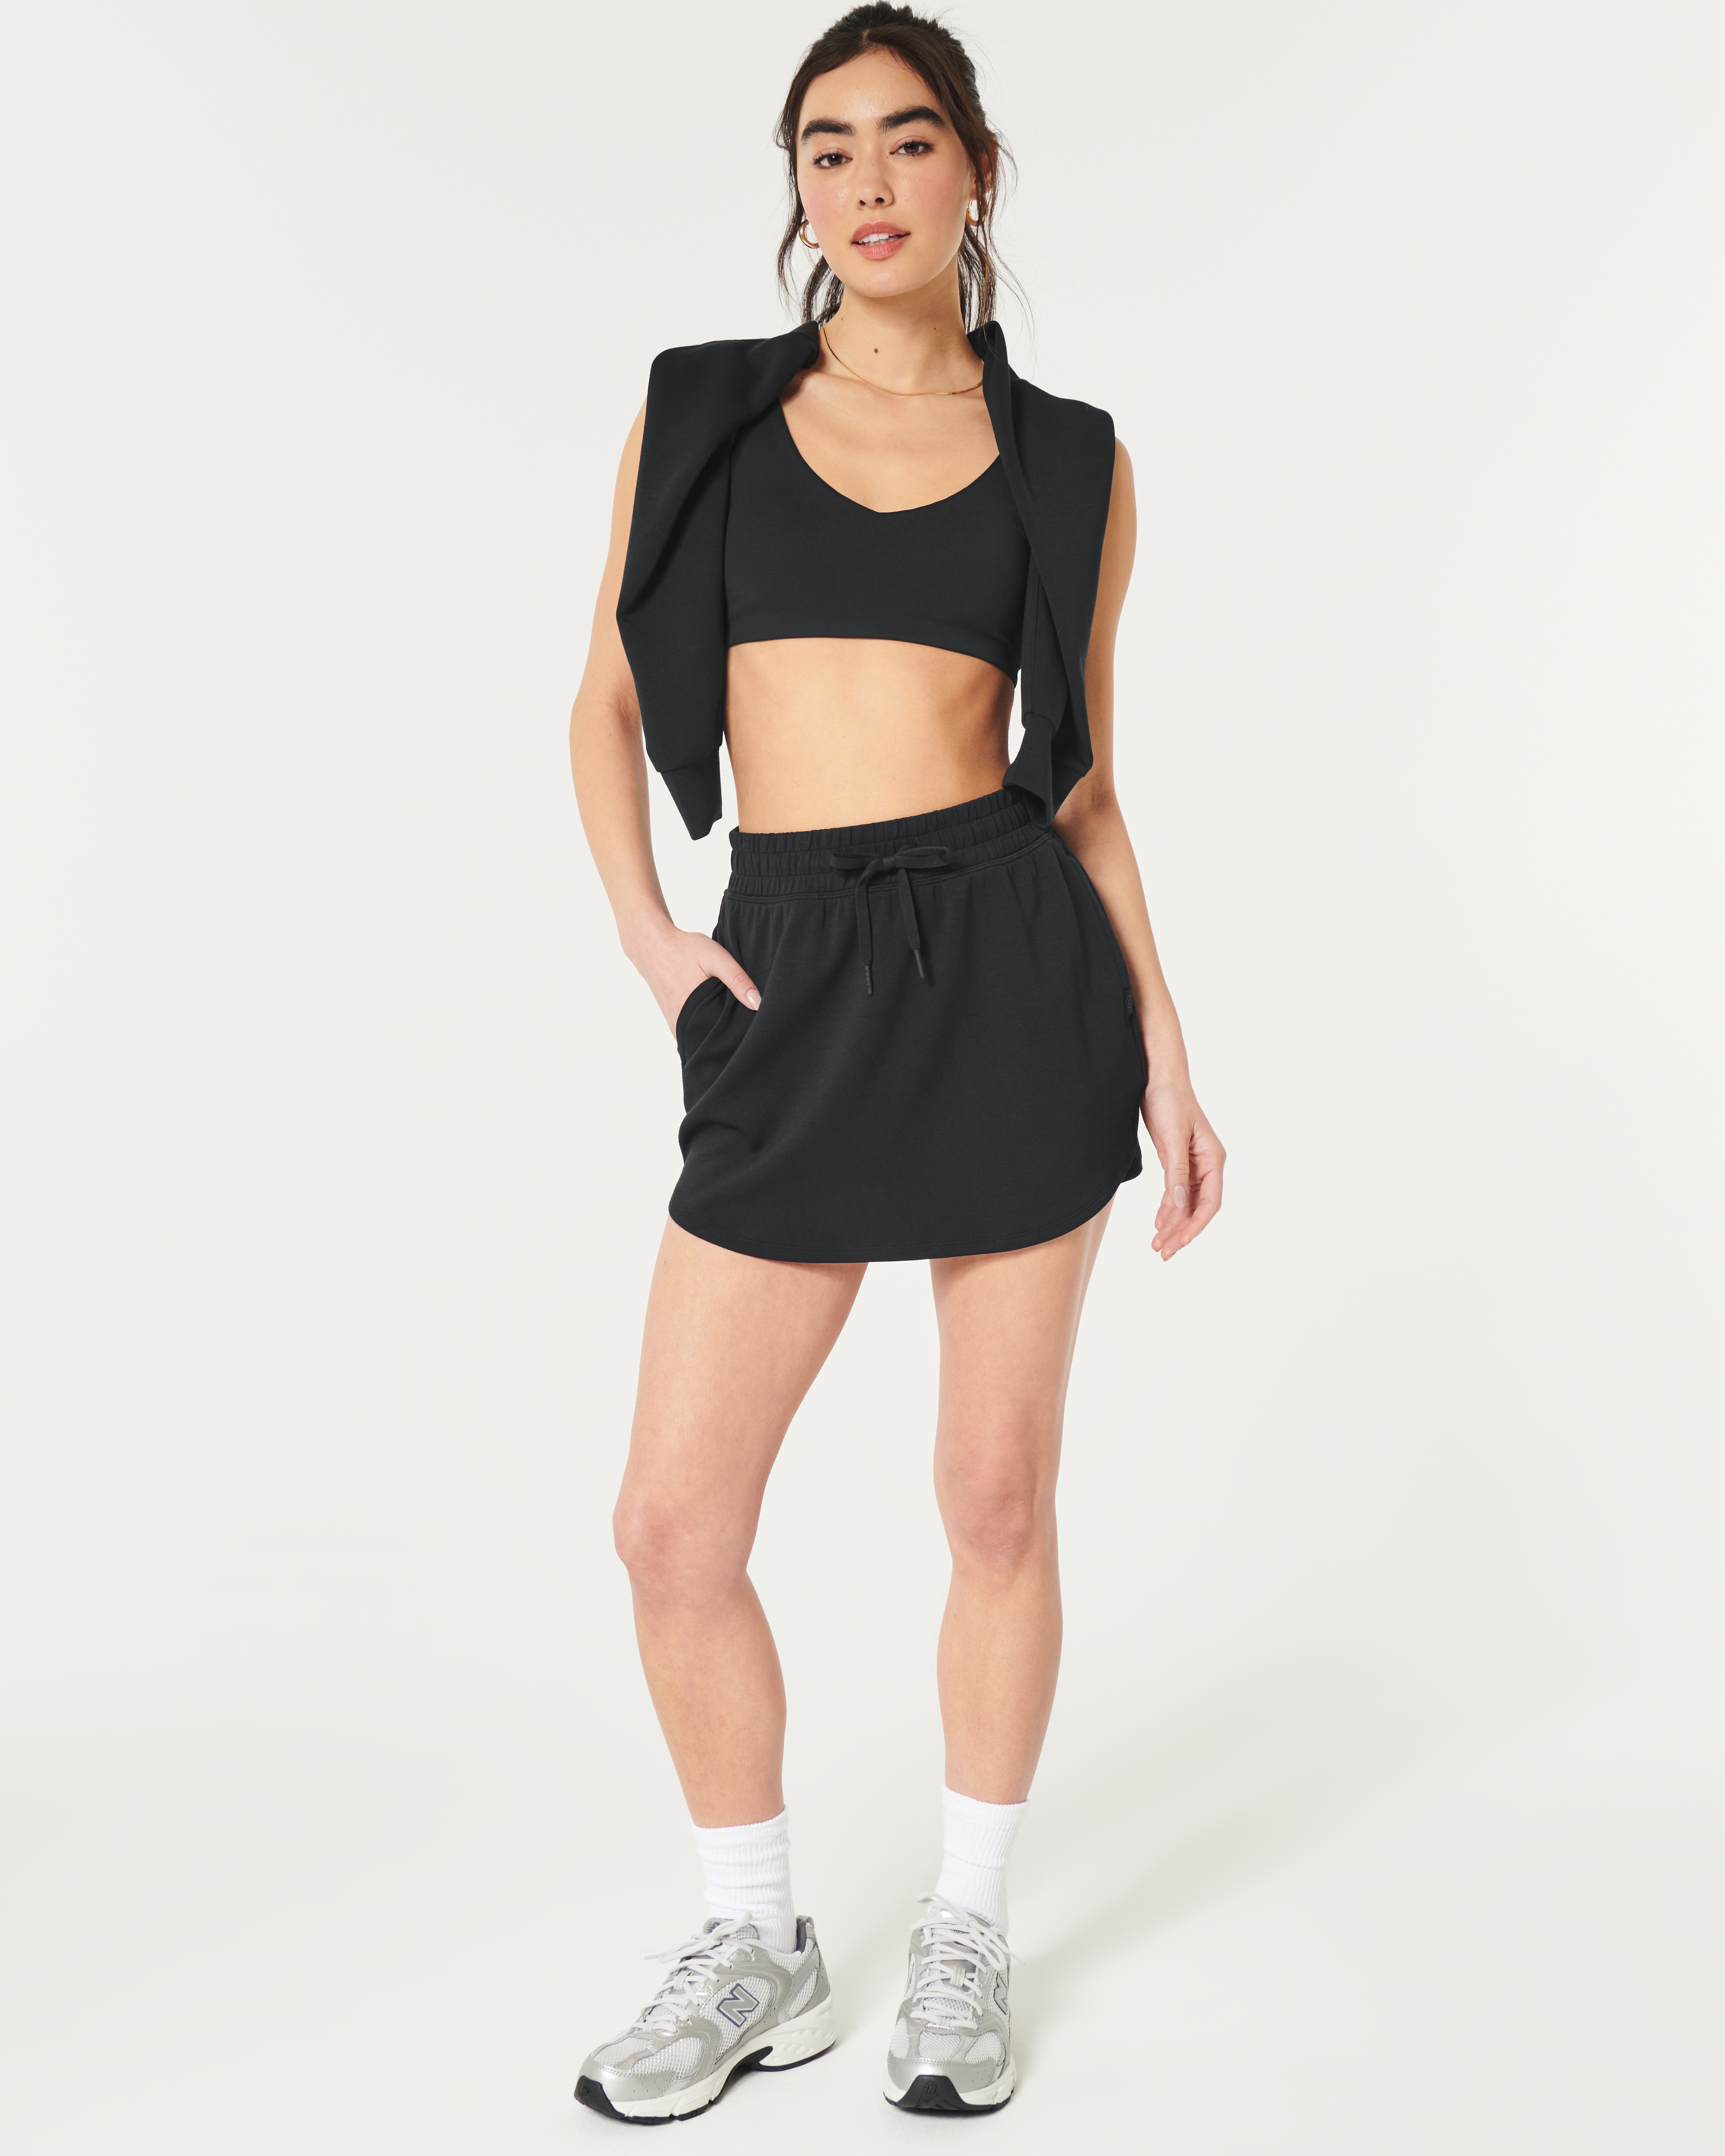 Gilly Hicks Active Cooldown Skirt